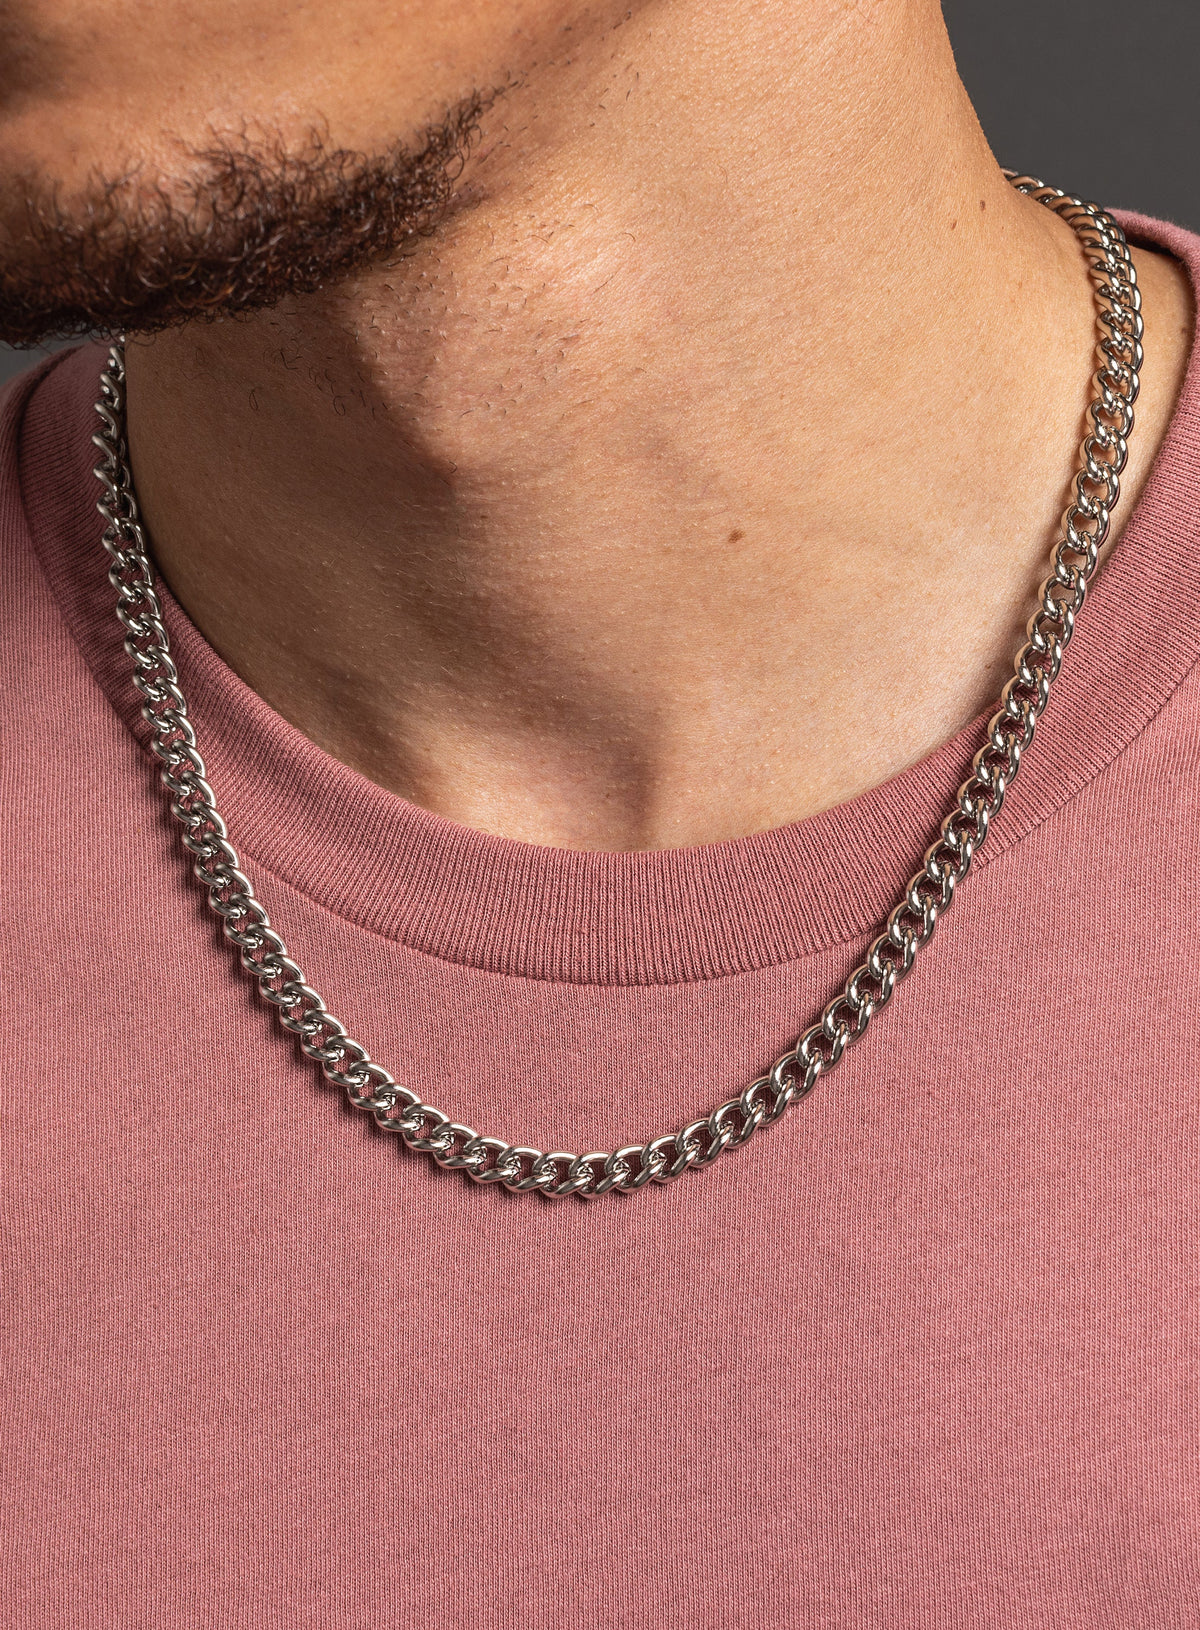 Mens Silver 316L Stainless Steel Cuban Curb Chain Necklace Choker  3/5/7/9/11mm